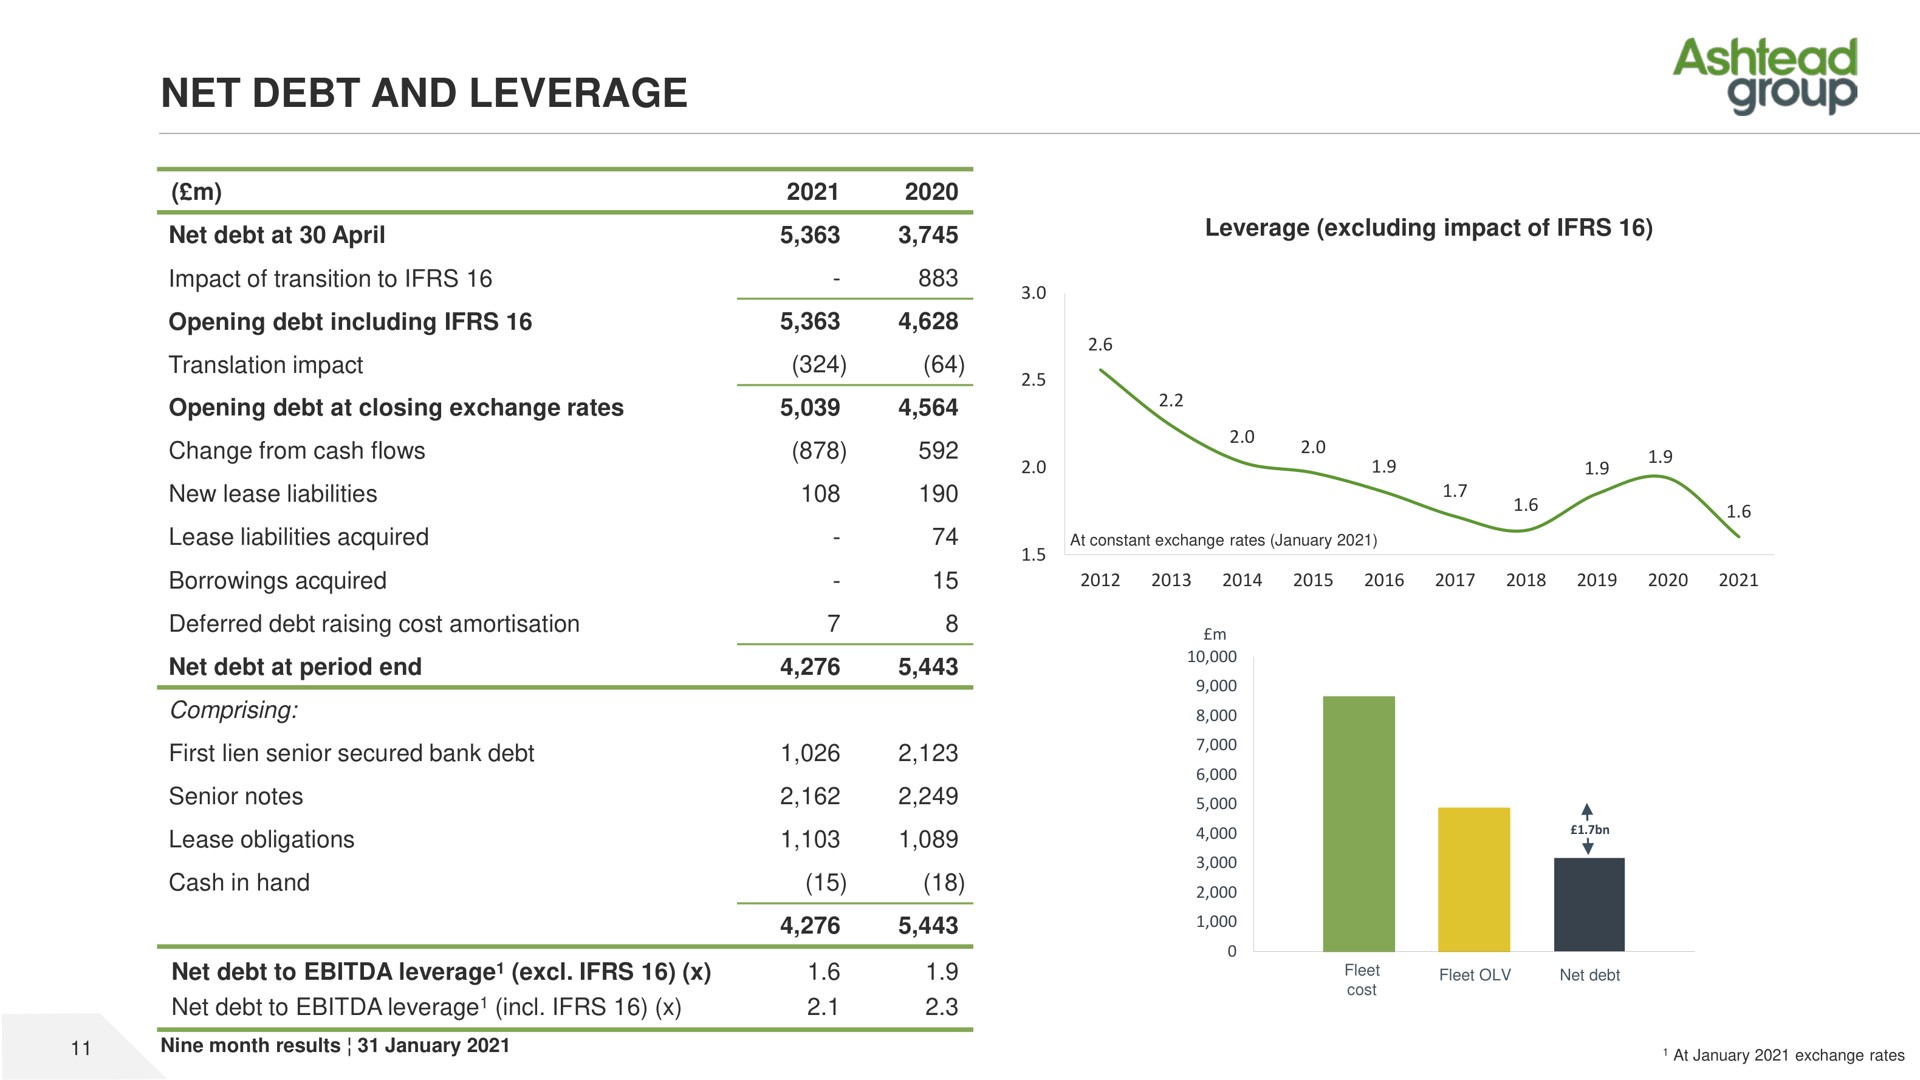 net debt and leverage group | Ashtead Group